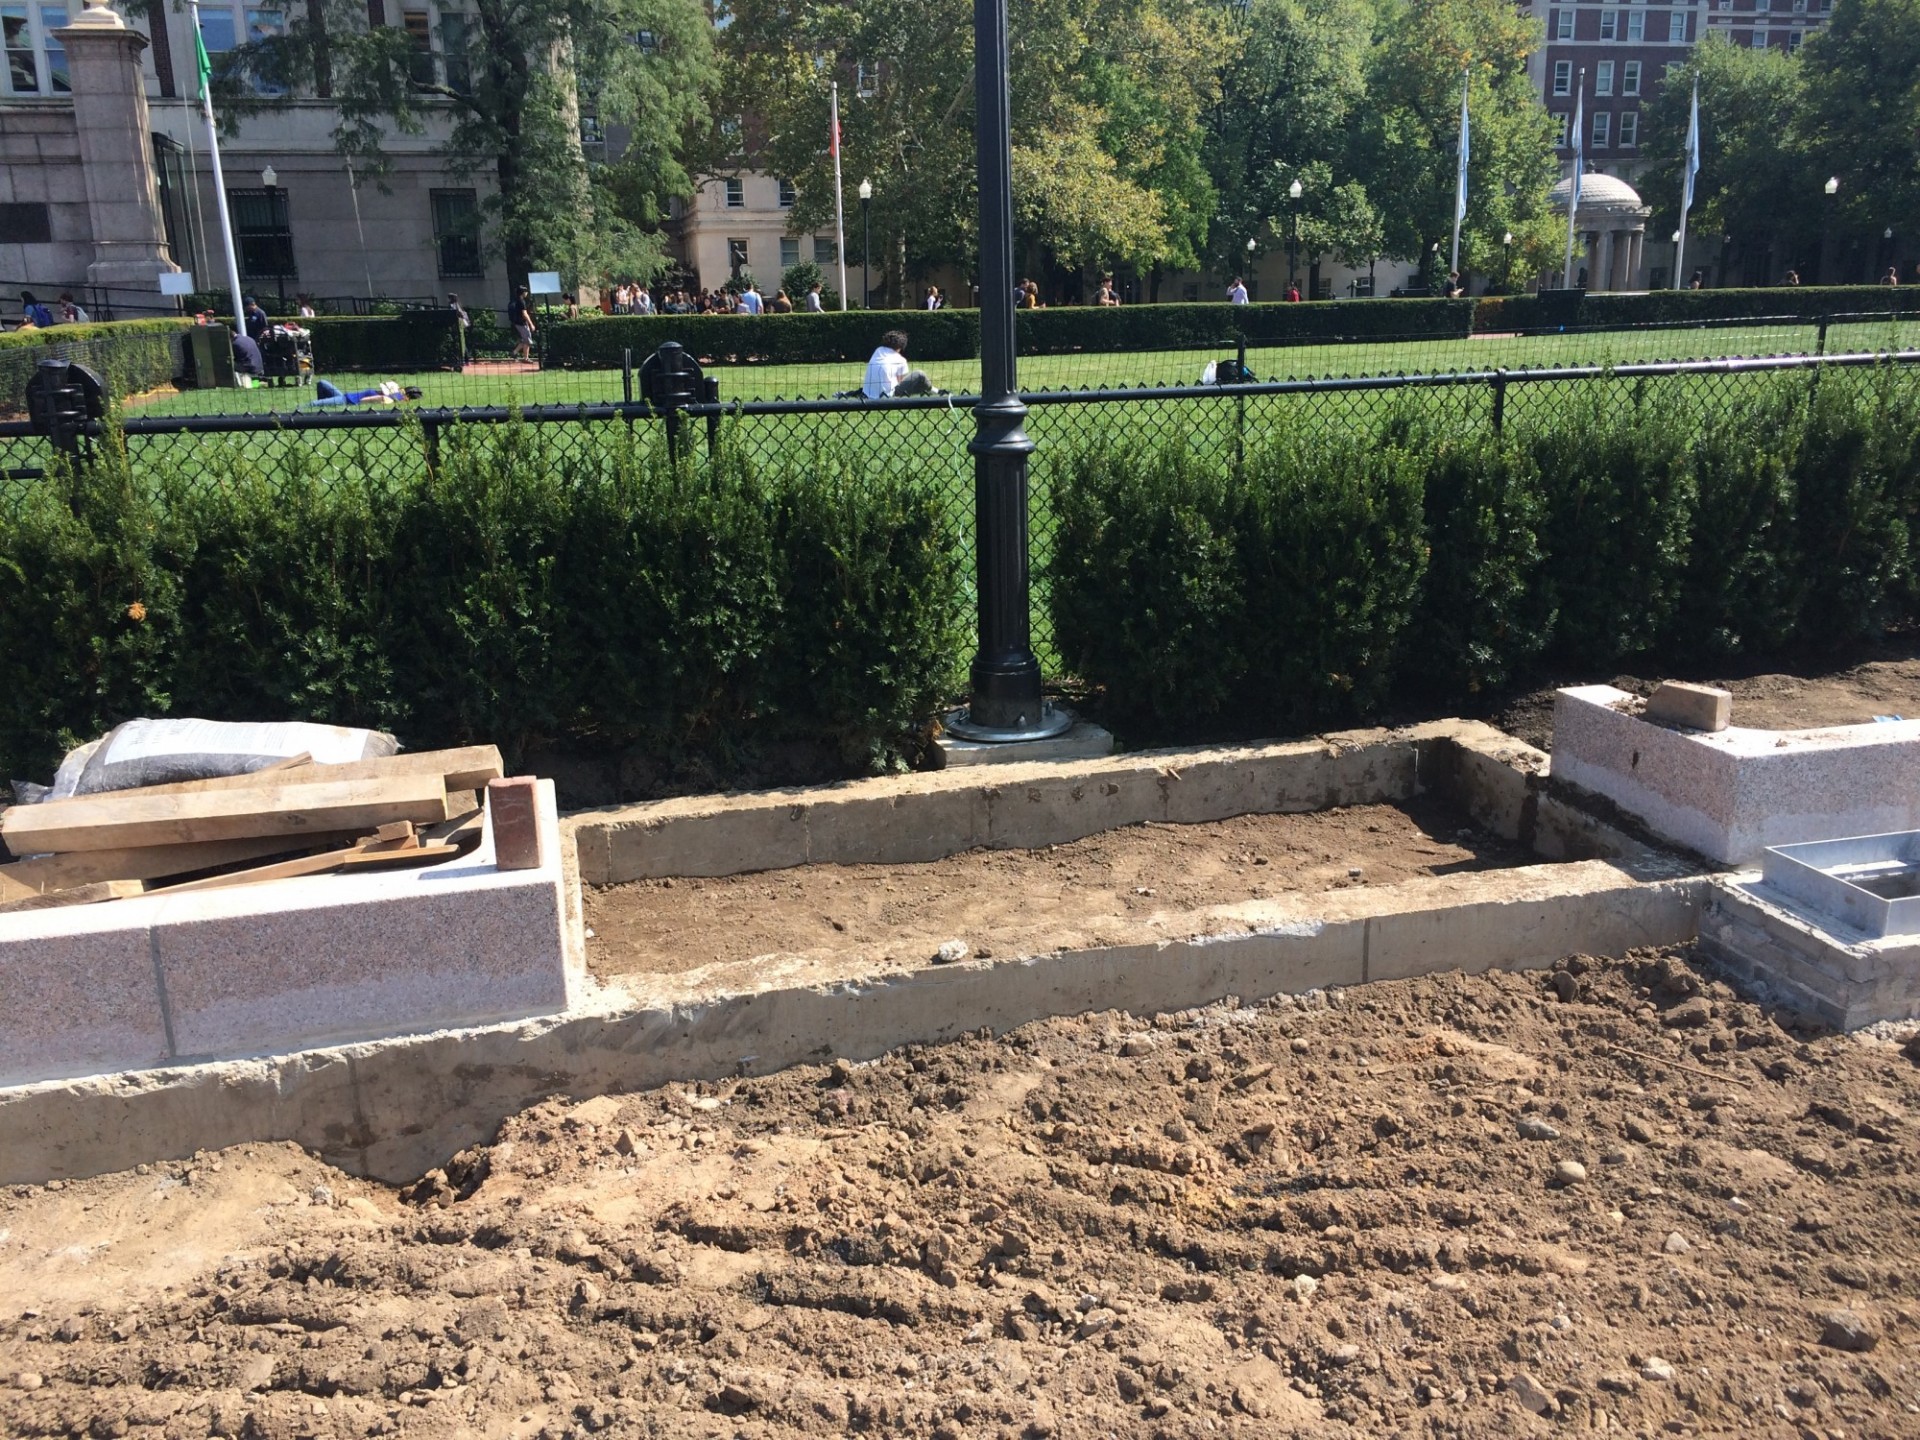 New benches will line the pathways along the perimeter of Butler Lawn. The area for a bench can be seen in this photo in front of the lamppost. (Photo from September 11, 2017)